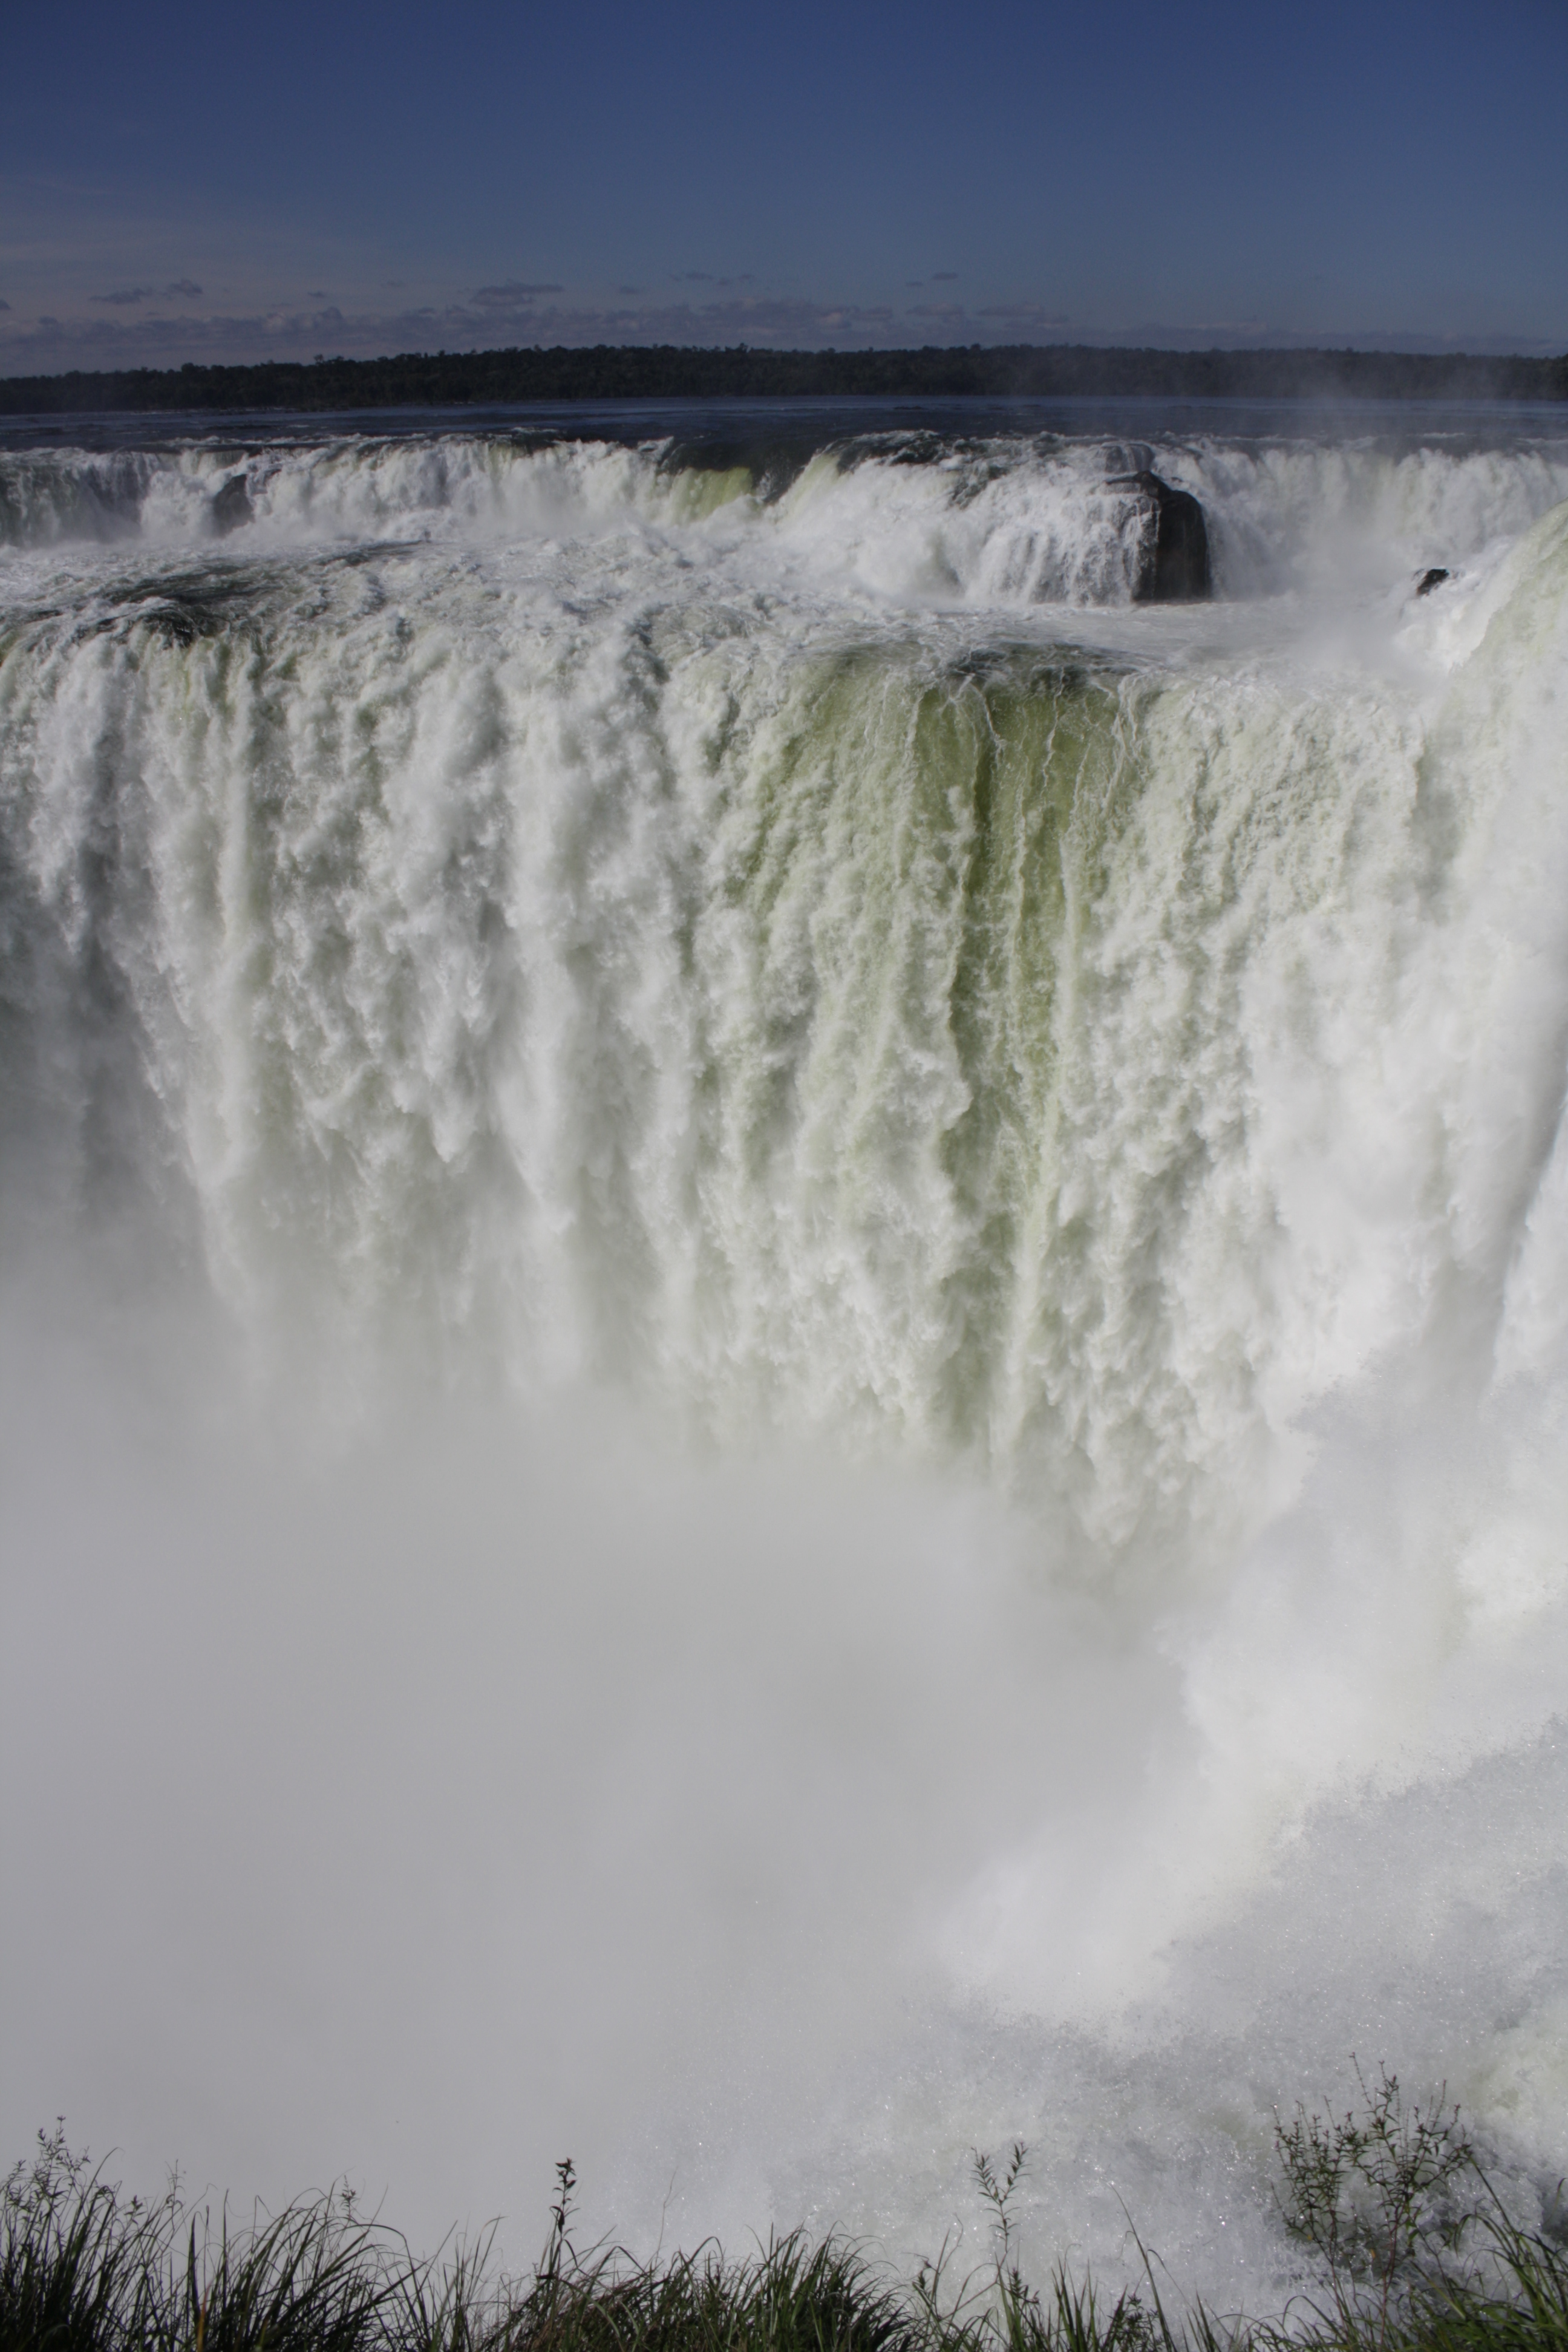 The Devil's Throat is a veritable wall of water cascading down in twisted, frothy jets, Iguazu Falls, Argentina